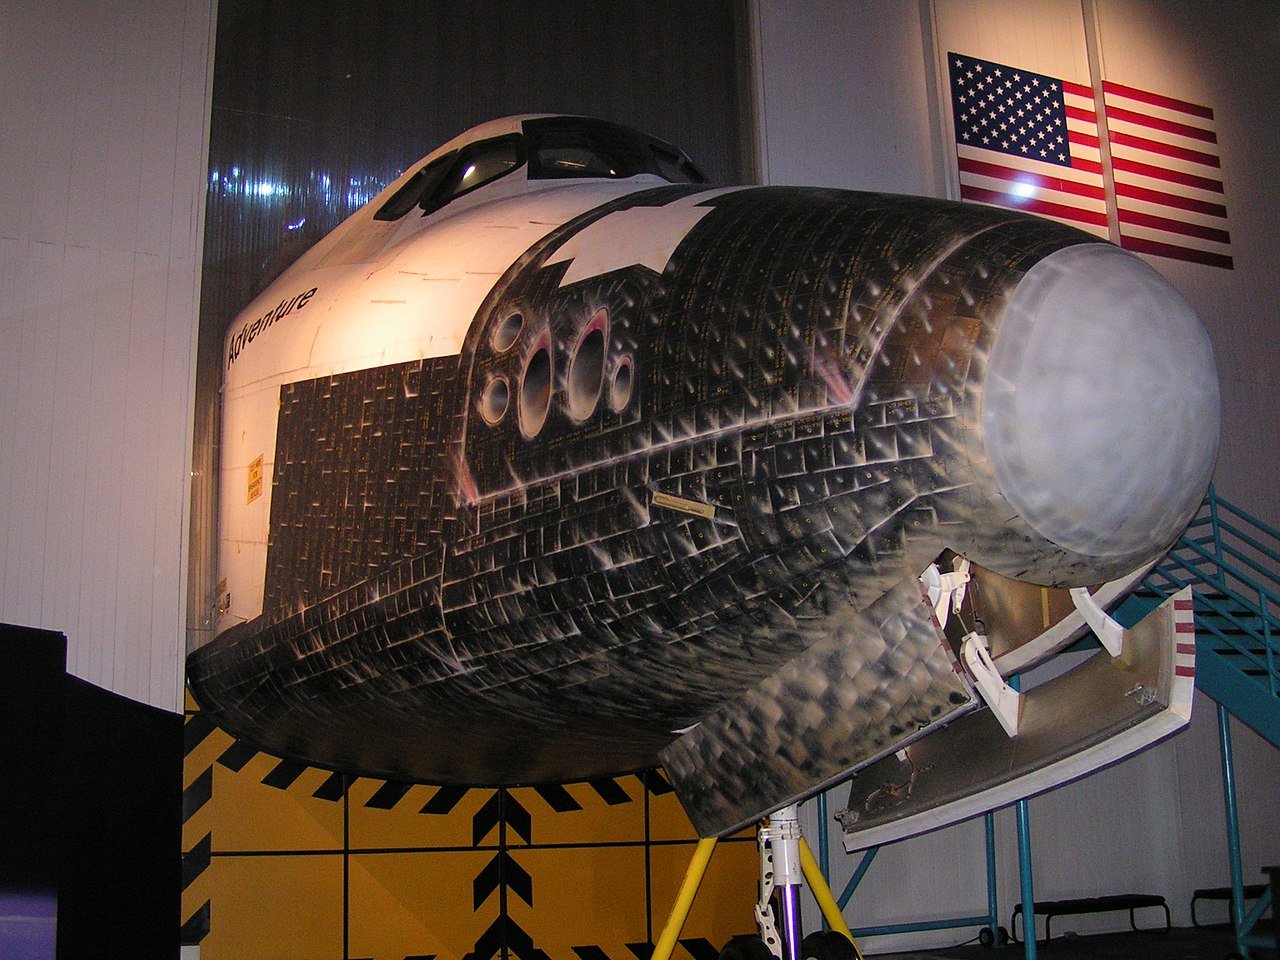 Adventure on display at Space Center Houston